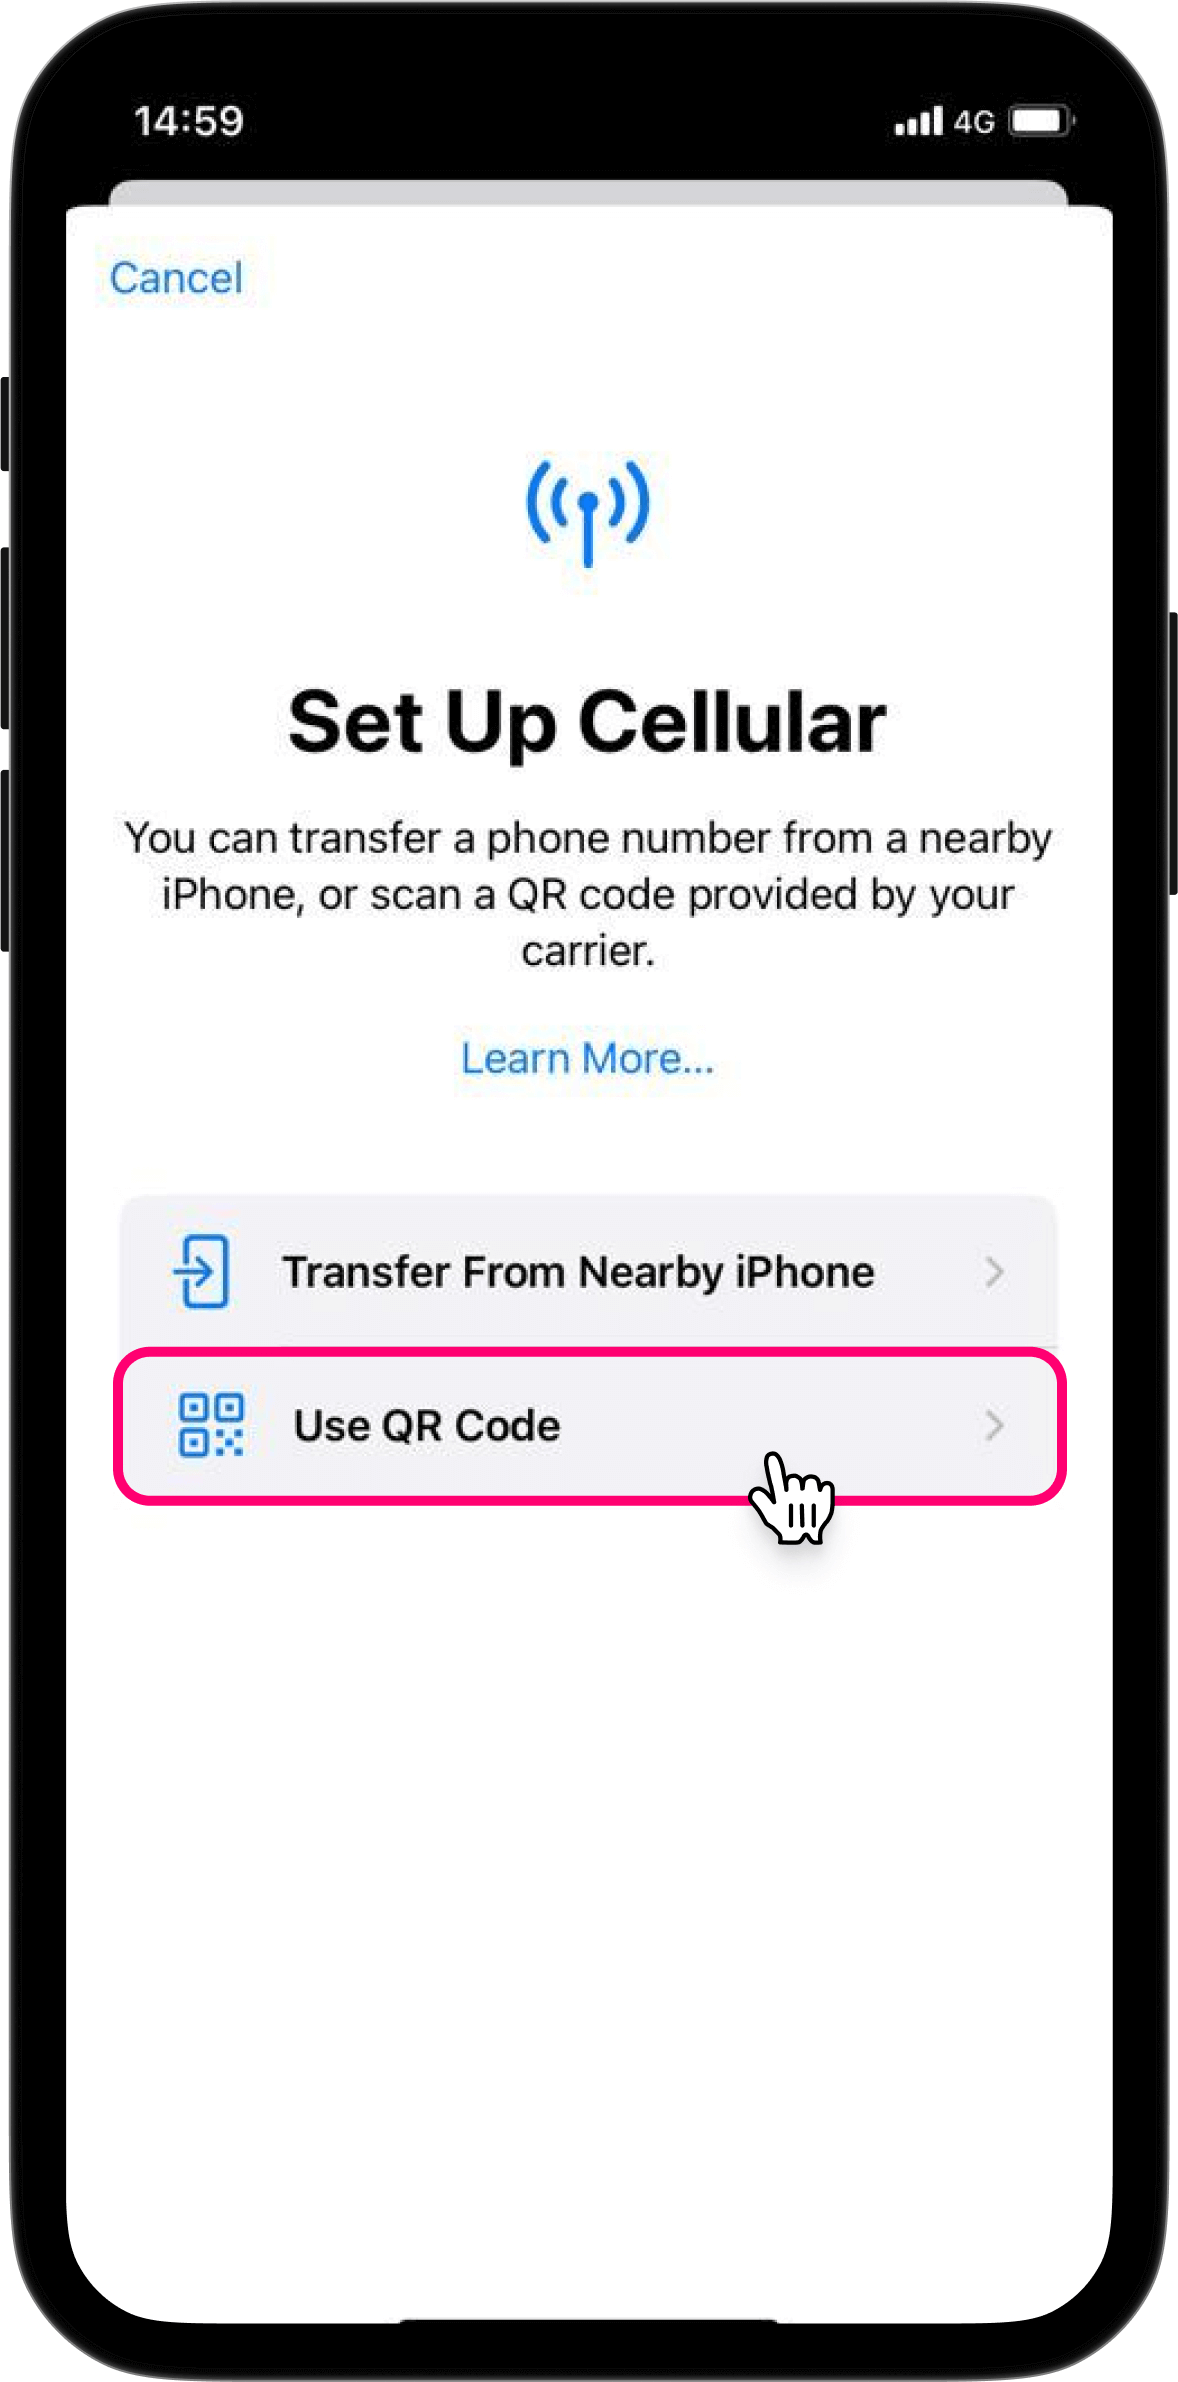 Use QR Code to Activate Your eSIM During iPhone Setup